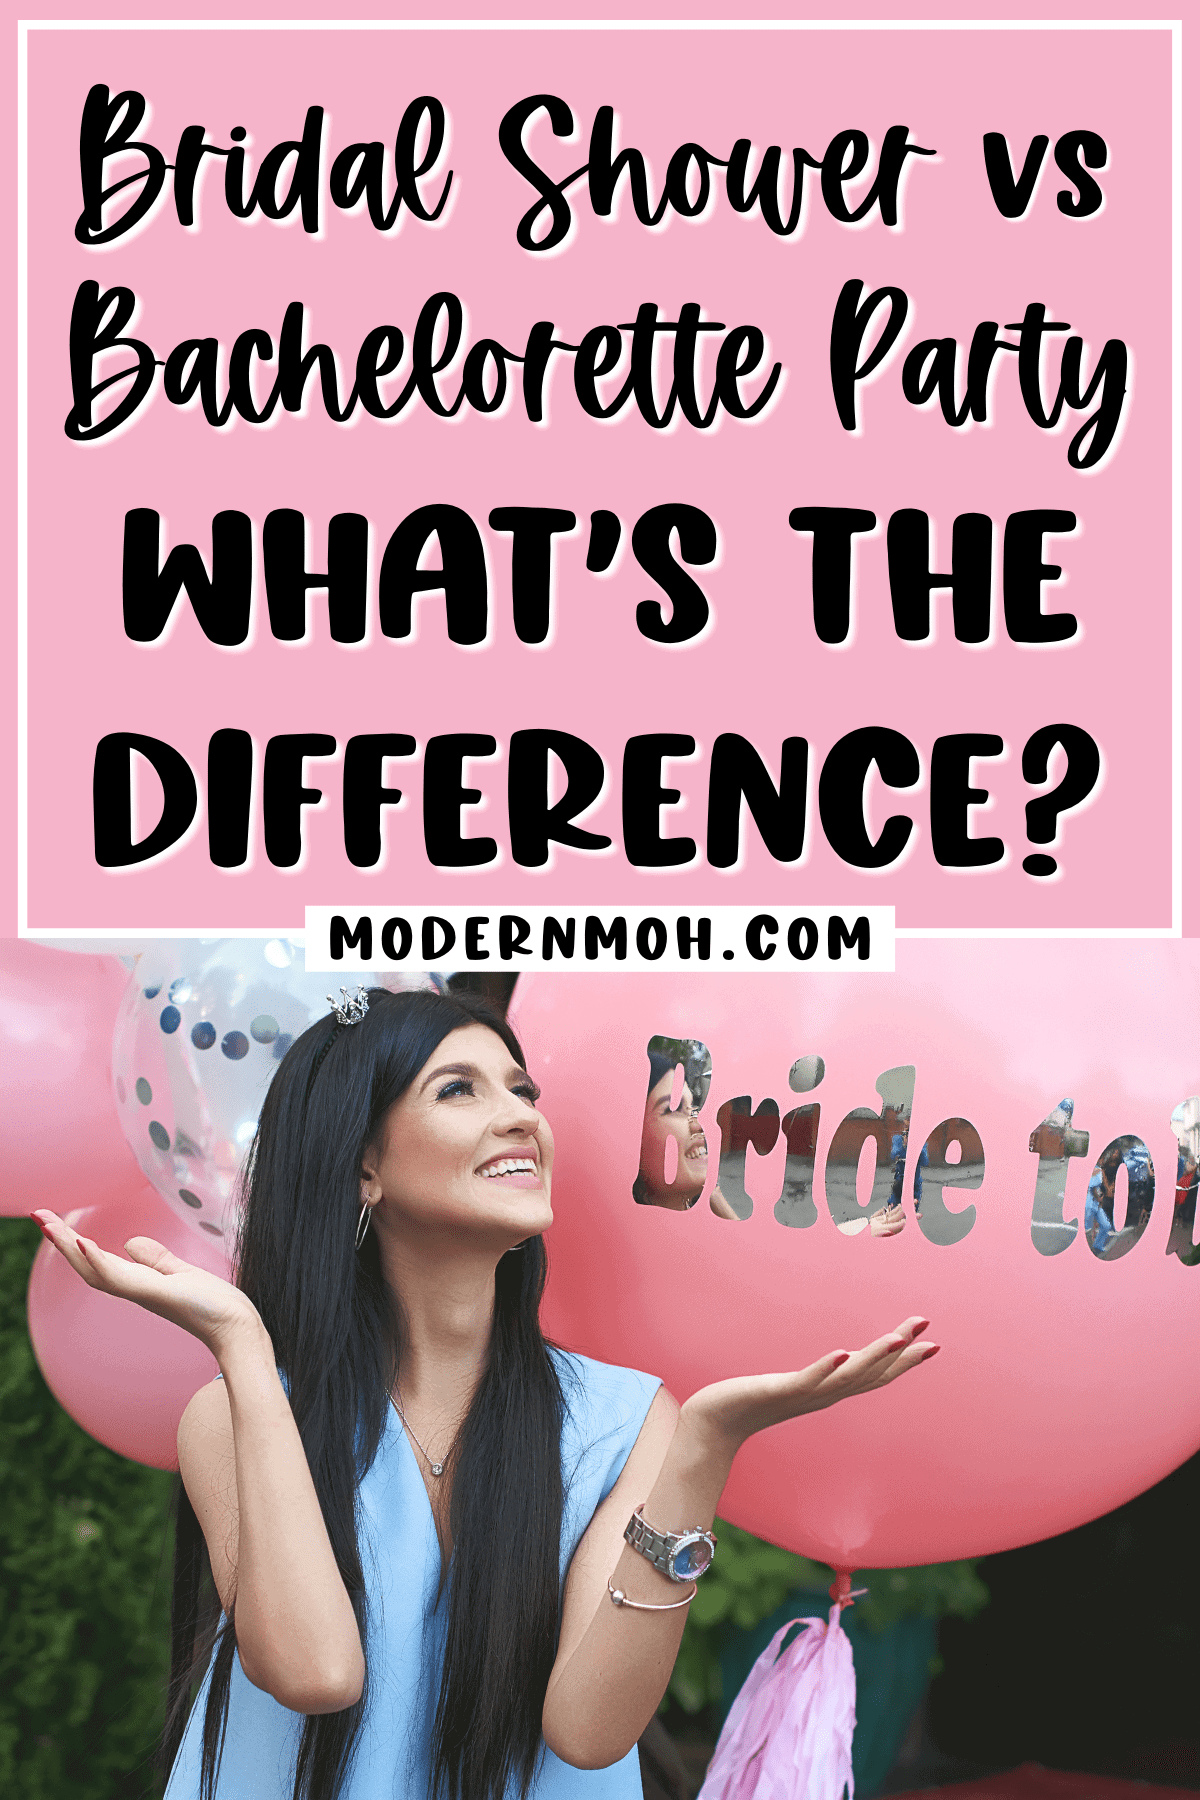 Bachelorette party or bachelorette party: what's the difference?